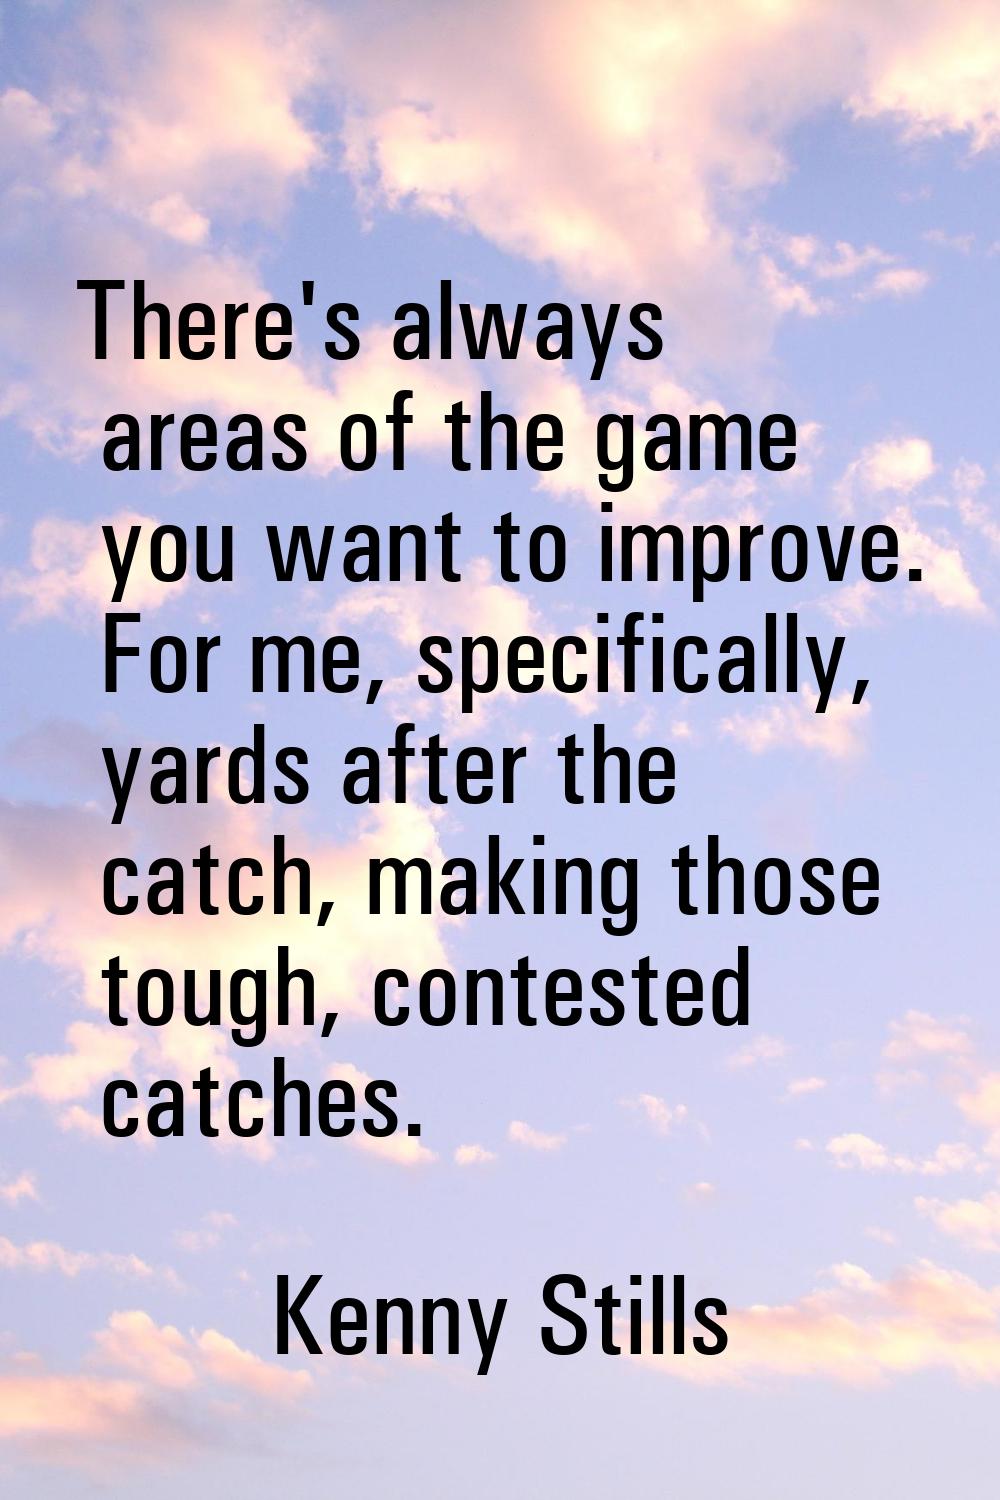 There's always areas of the game you want to improve. For me, specifically, yards after the catch, 